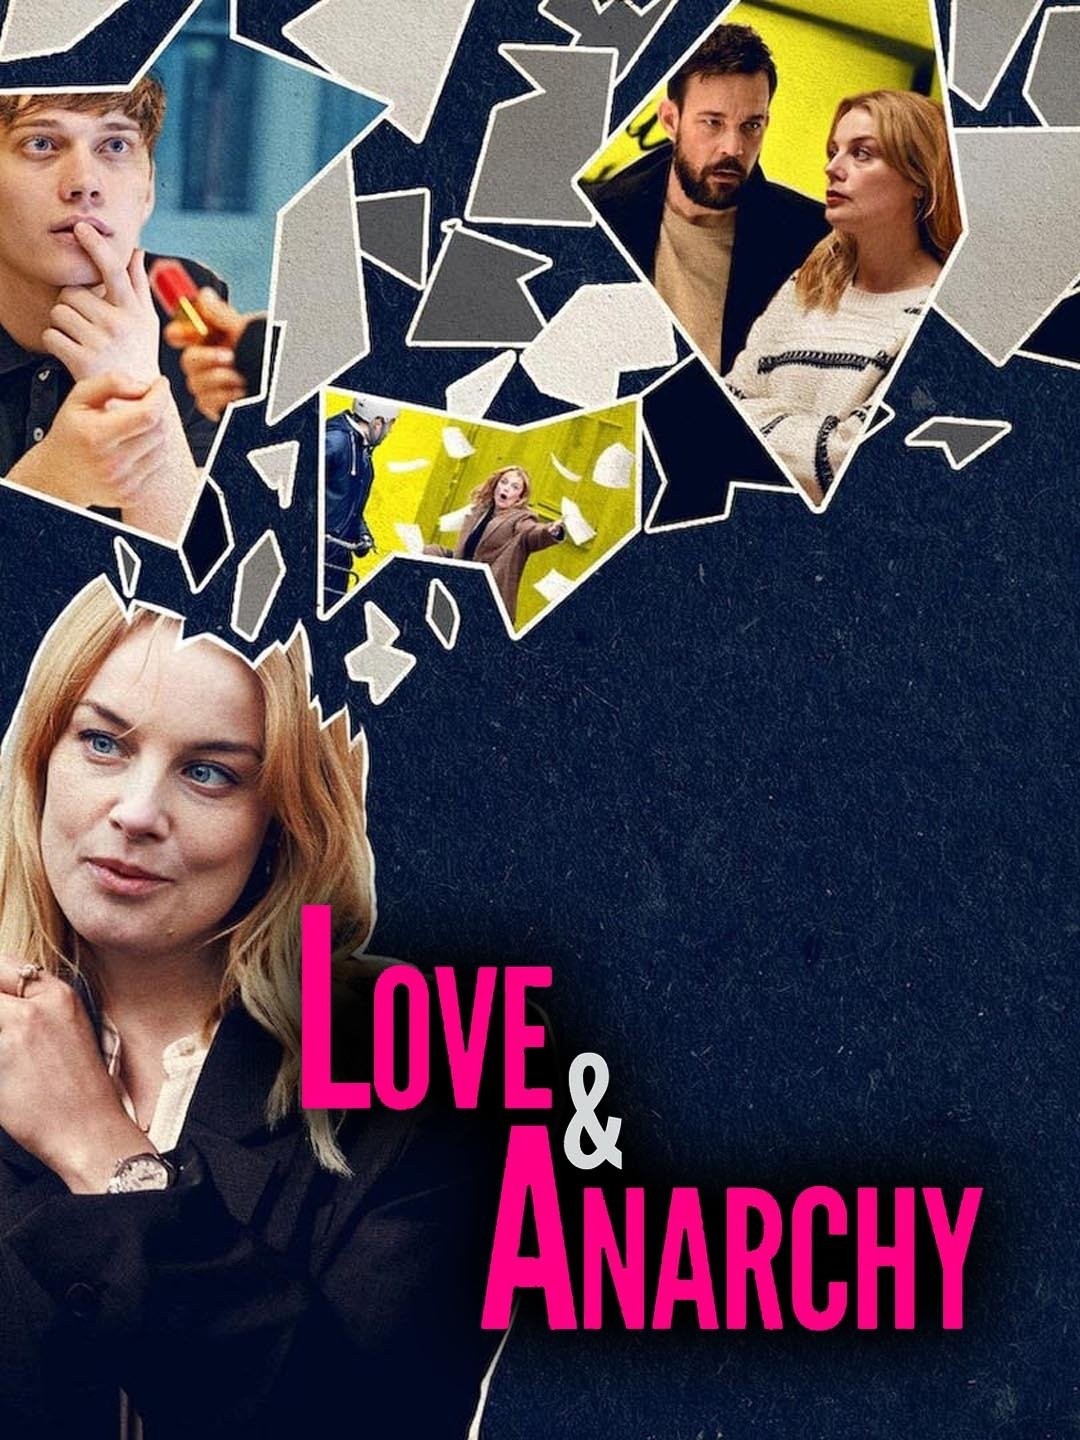 Love and anarchy netflix sex scenes